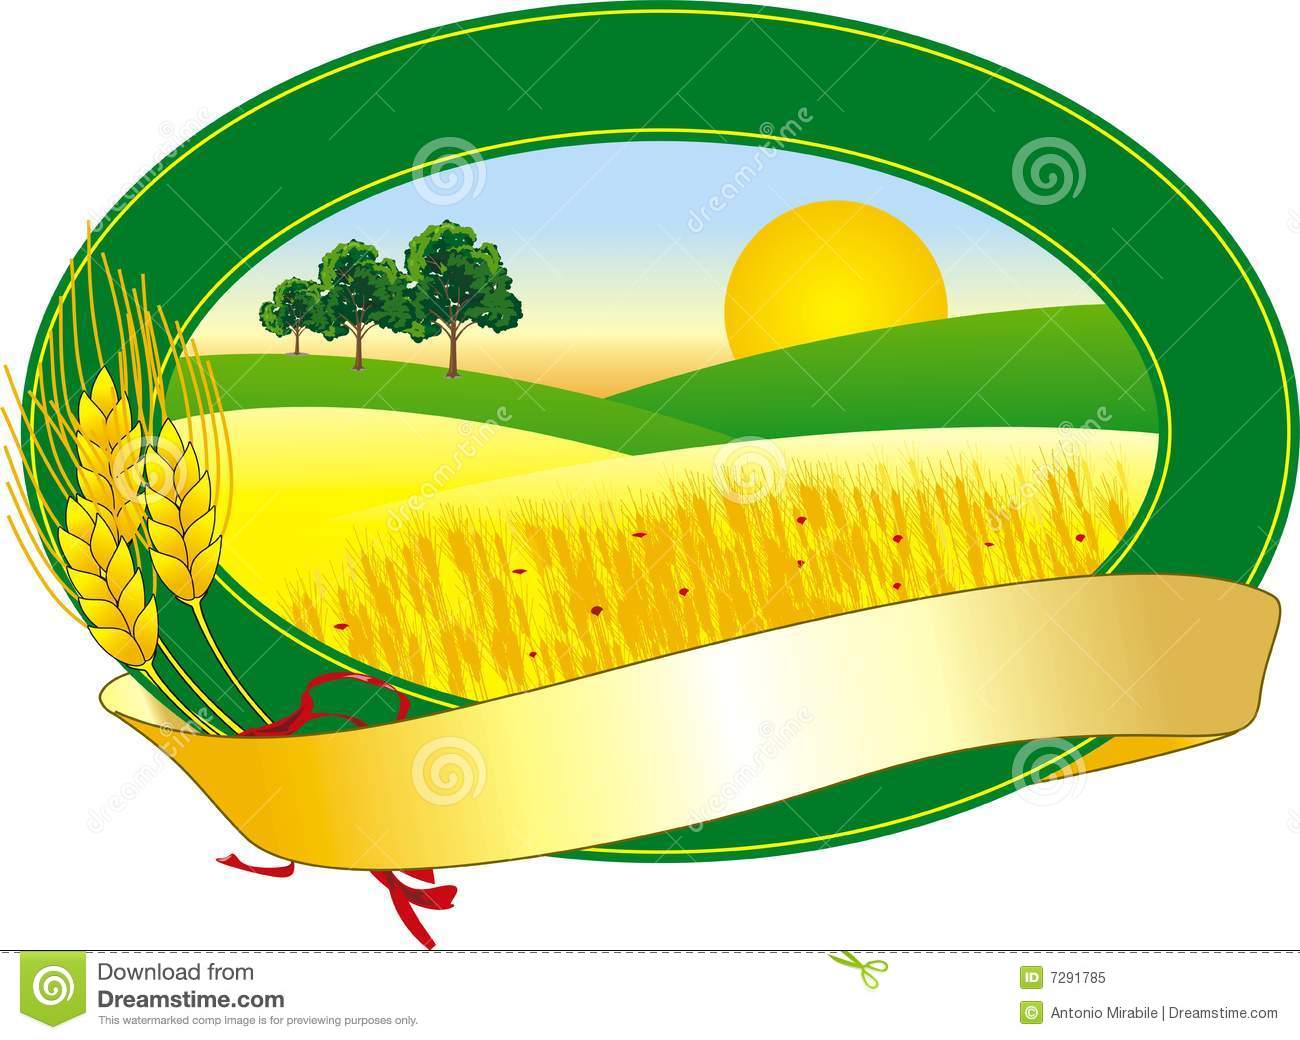 Agriculture Logo Royalty Free Stock Photo   Image  7291785